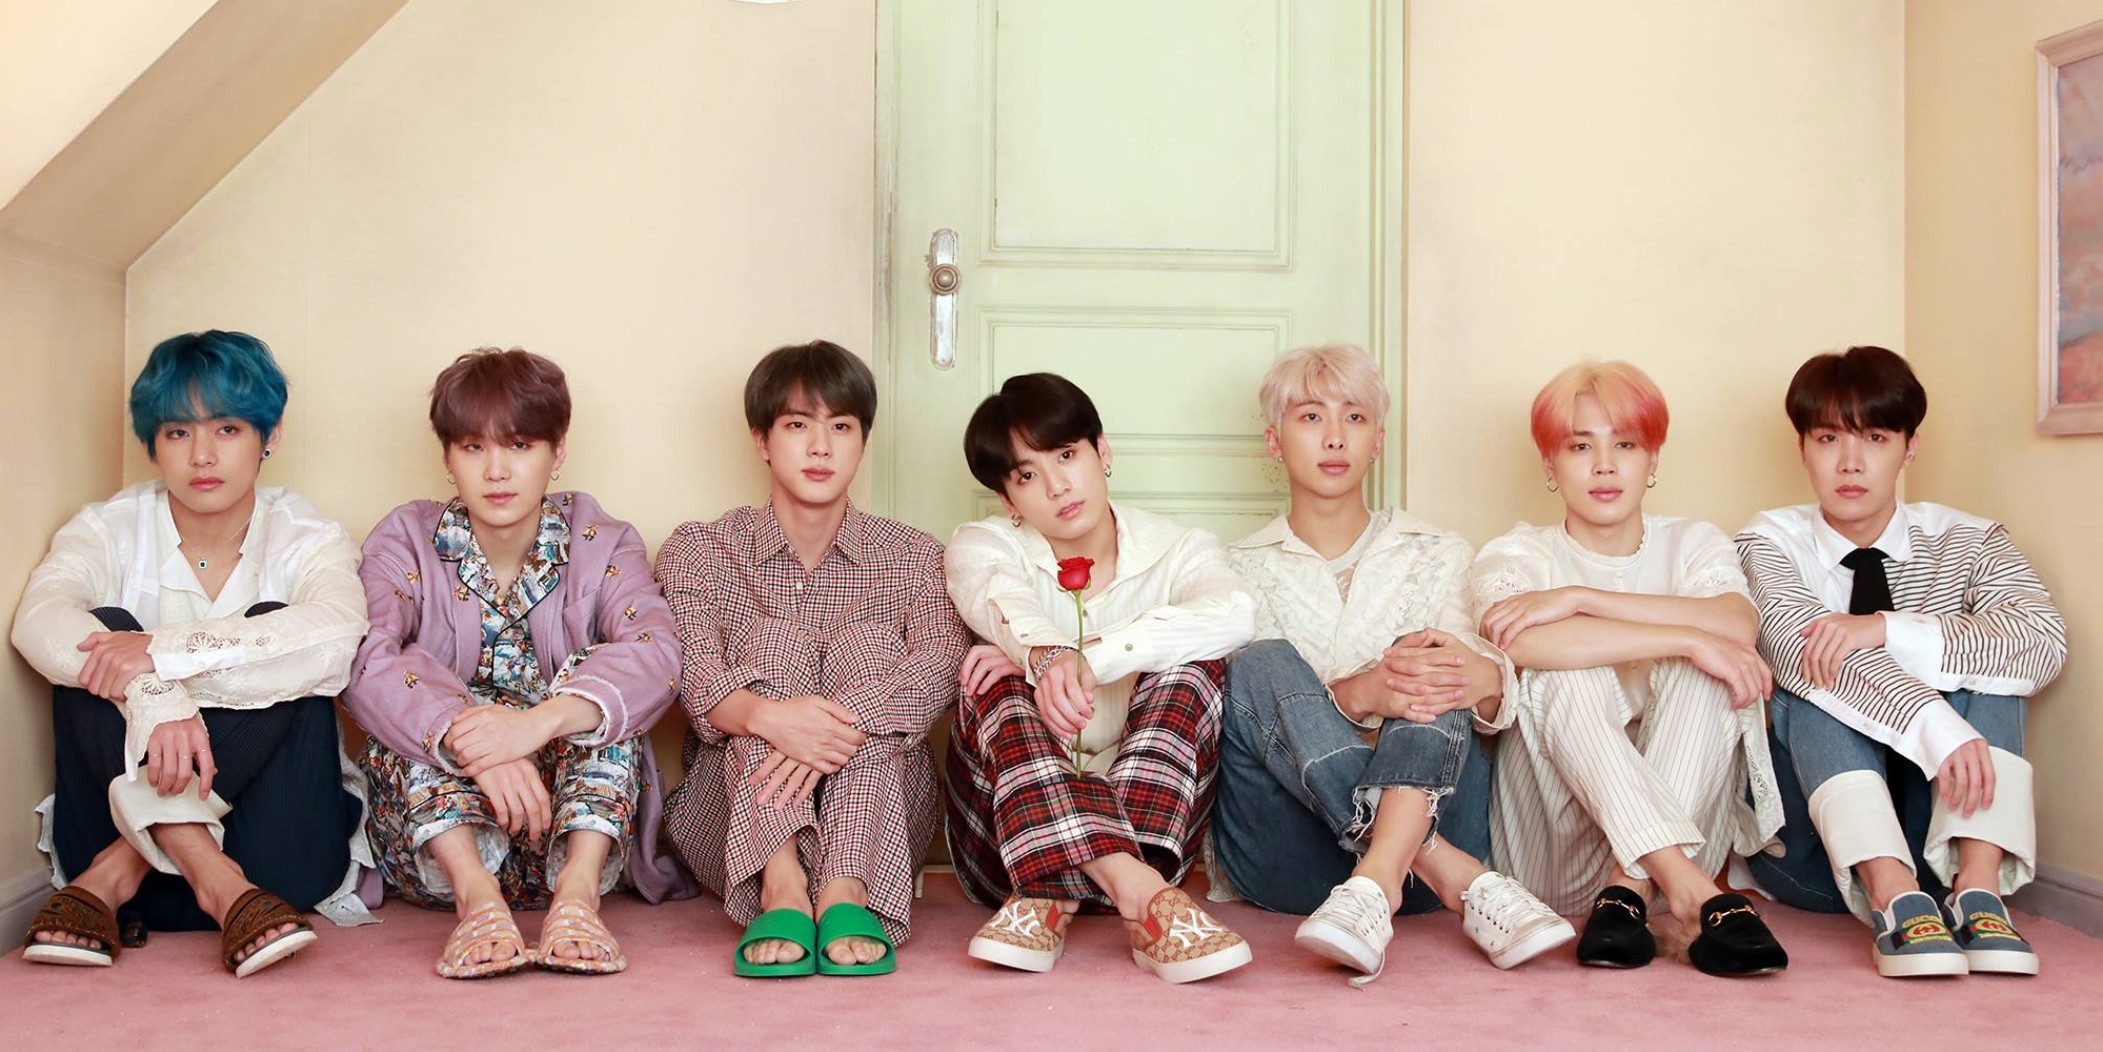 BTS explores self-image, the cost of fame, and acceptance in “Map of the Soul: Persona”